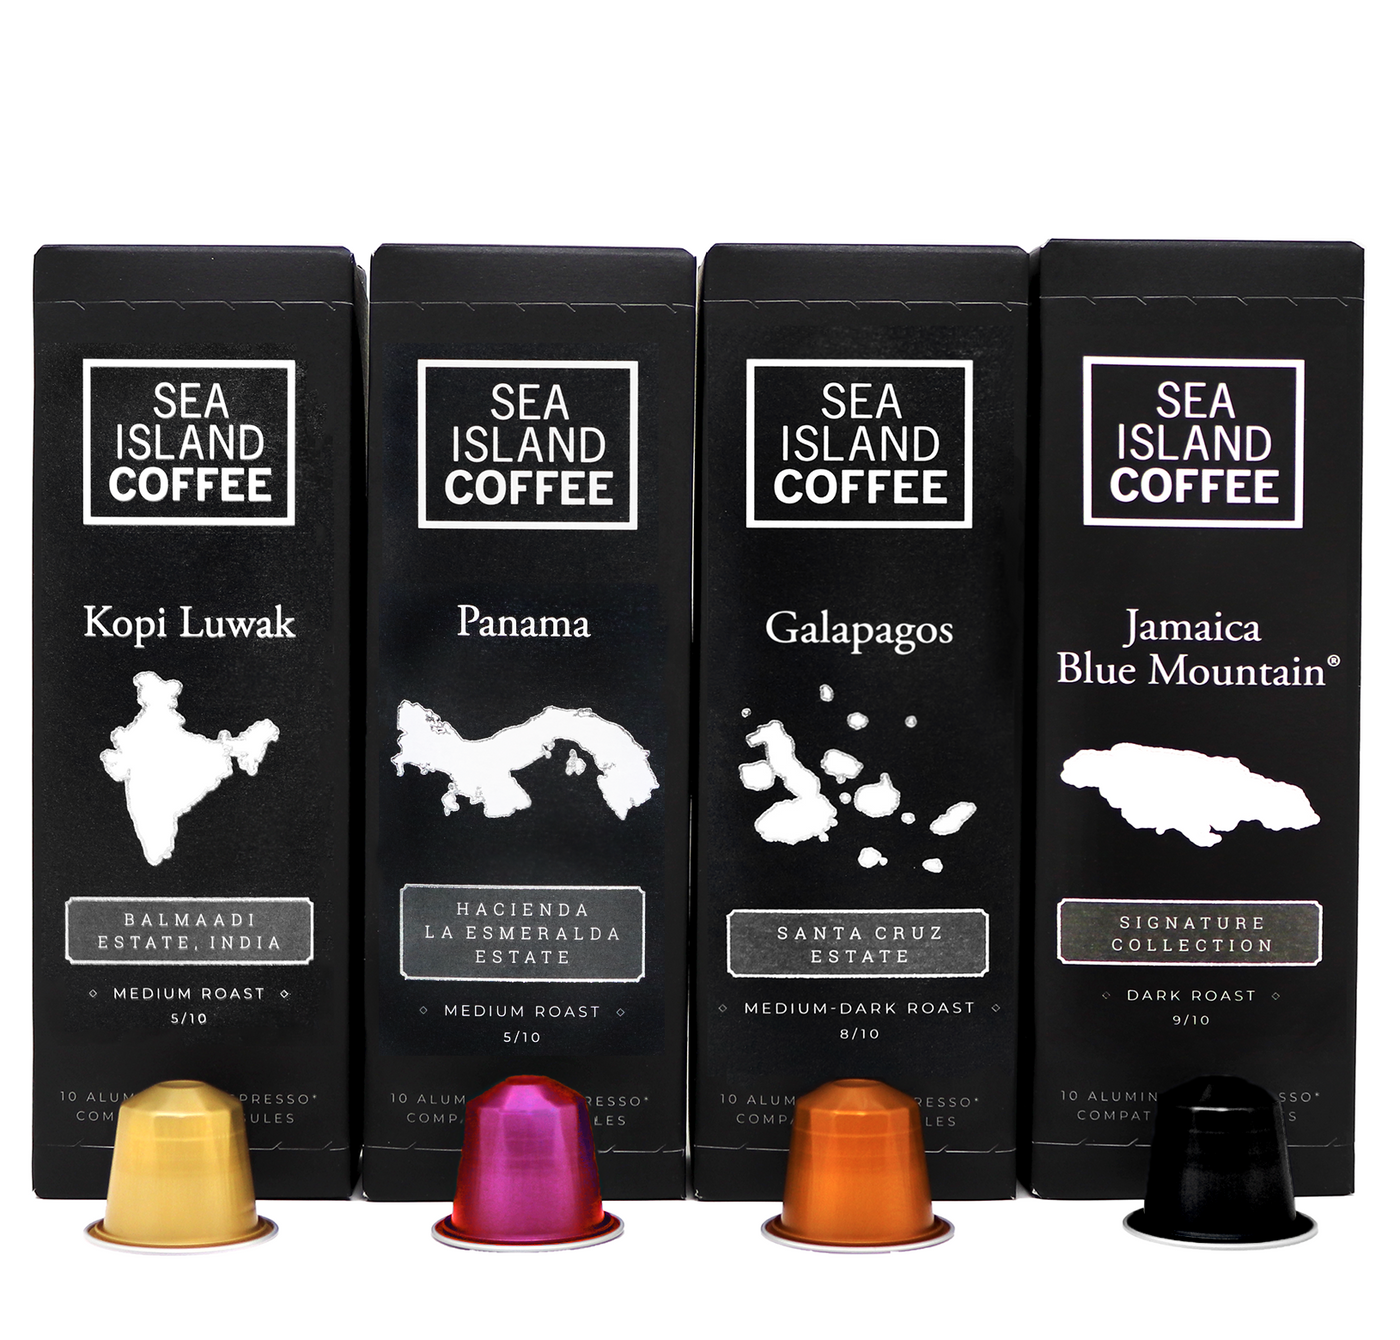 Box of 4 black boxes of different Nespresso compatible coffee pods